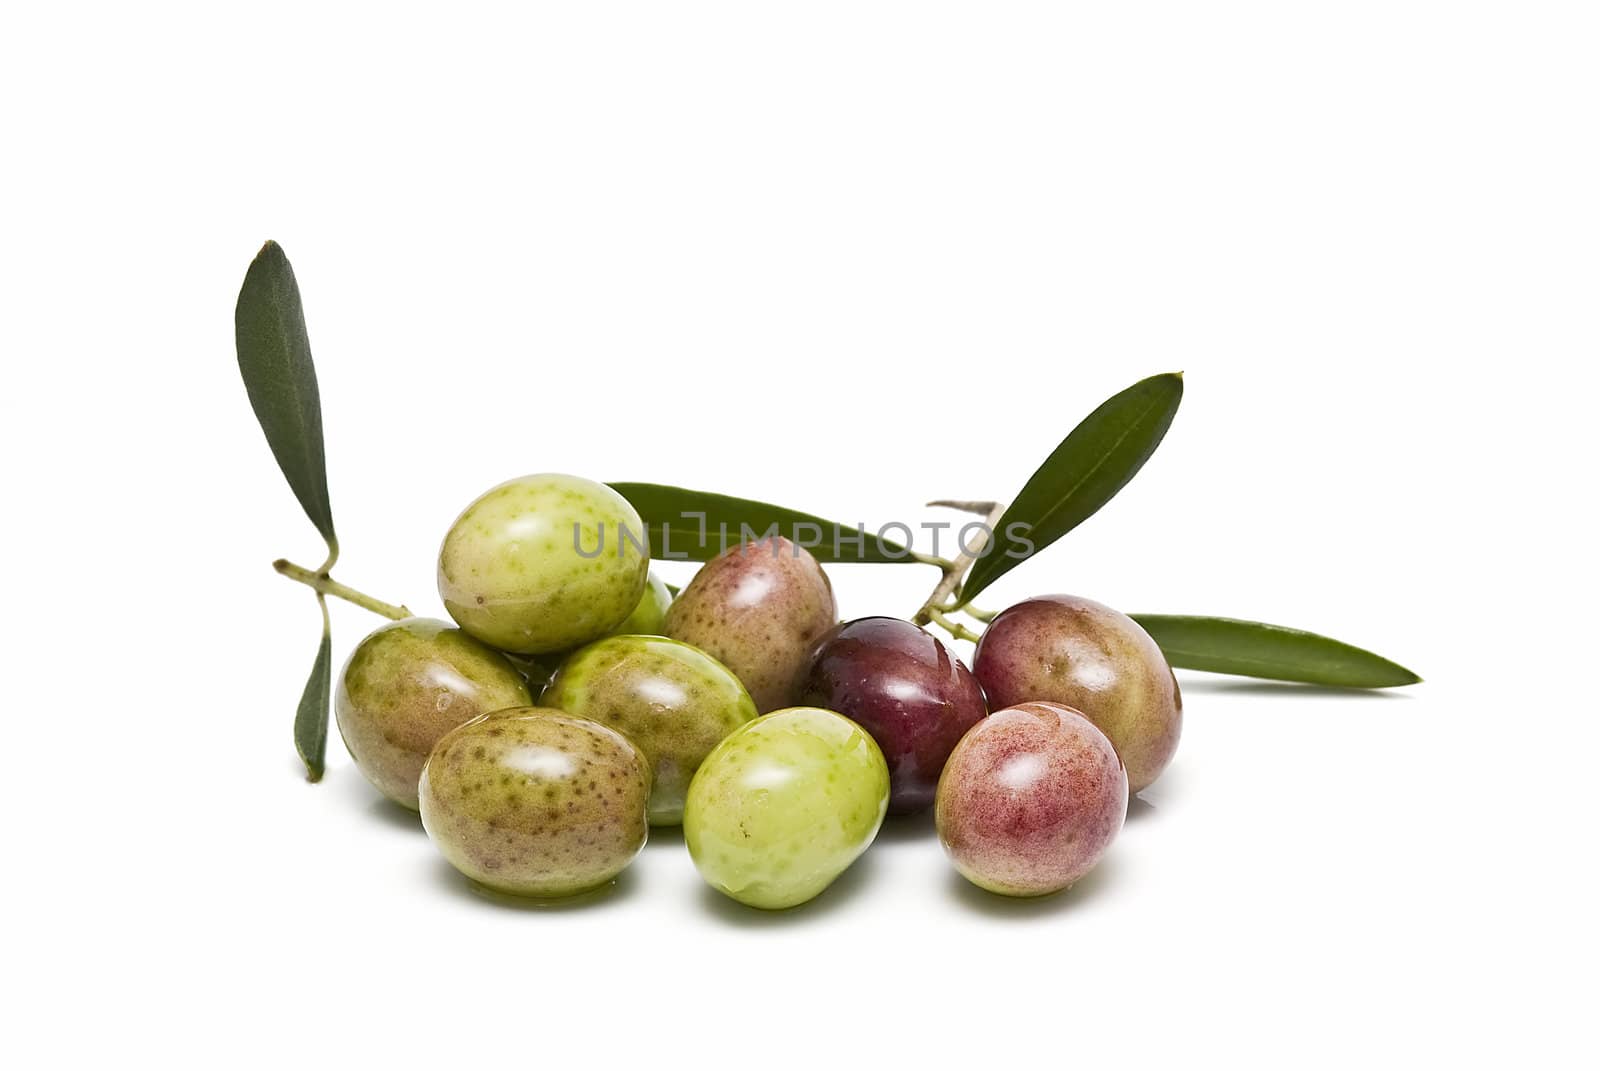 Some olives with leaves.